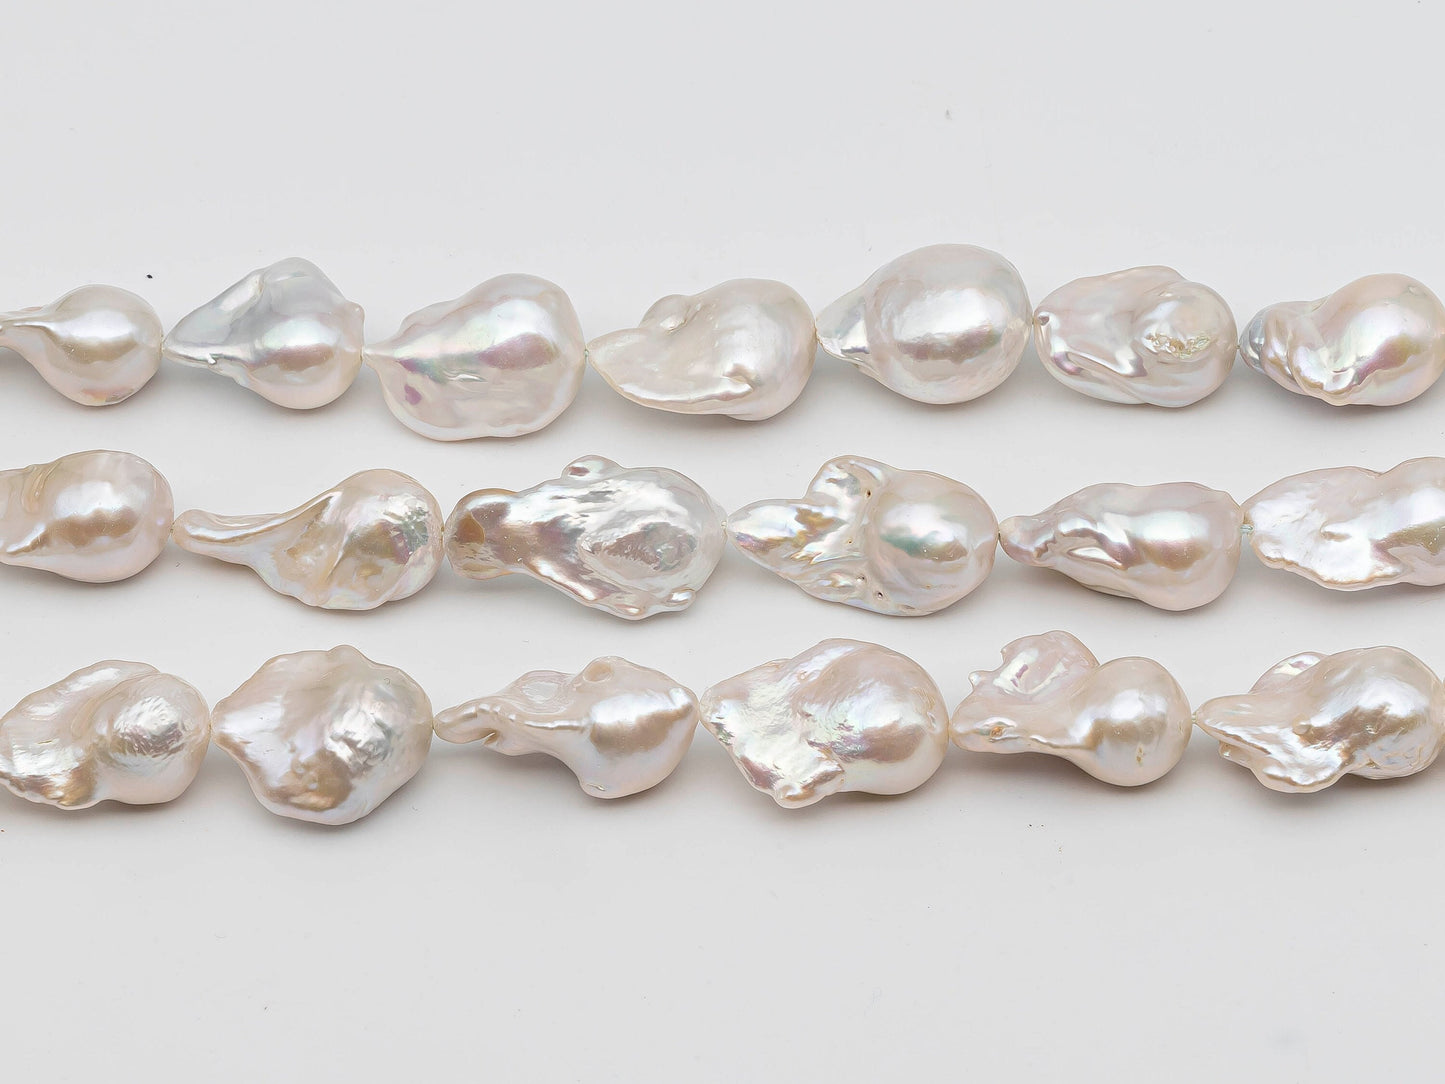 11-14mm Baroque Pearl with High Luster in Full Strand for Beads, SKU # 1241BA